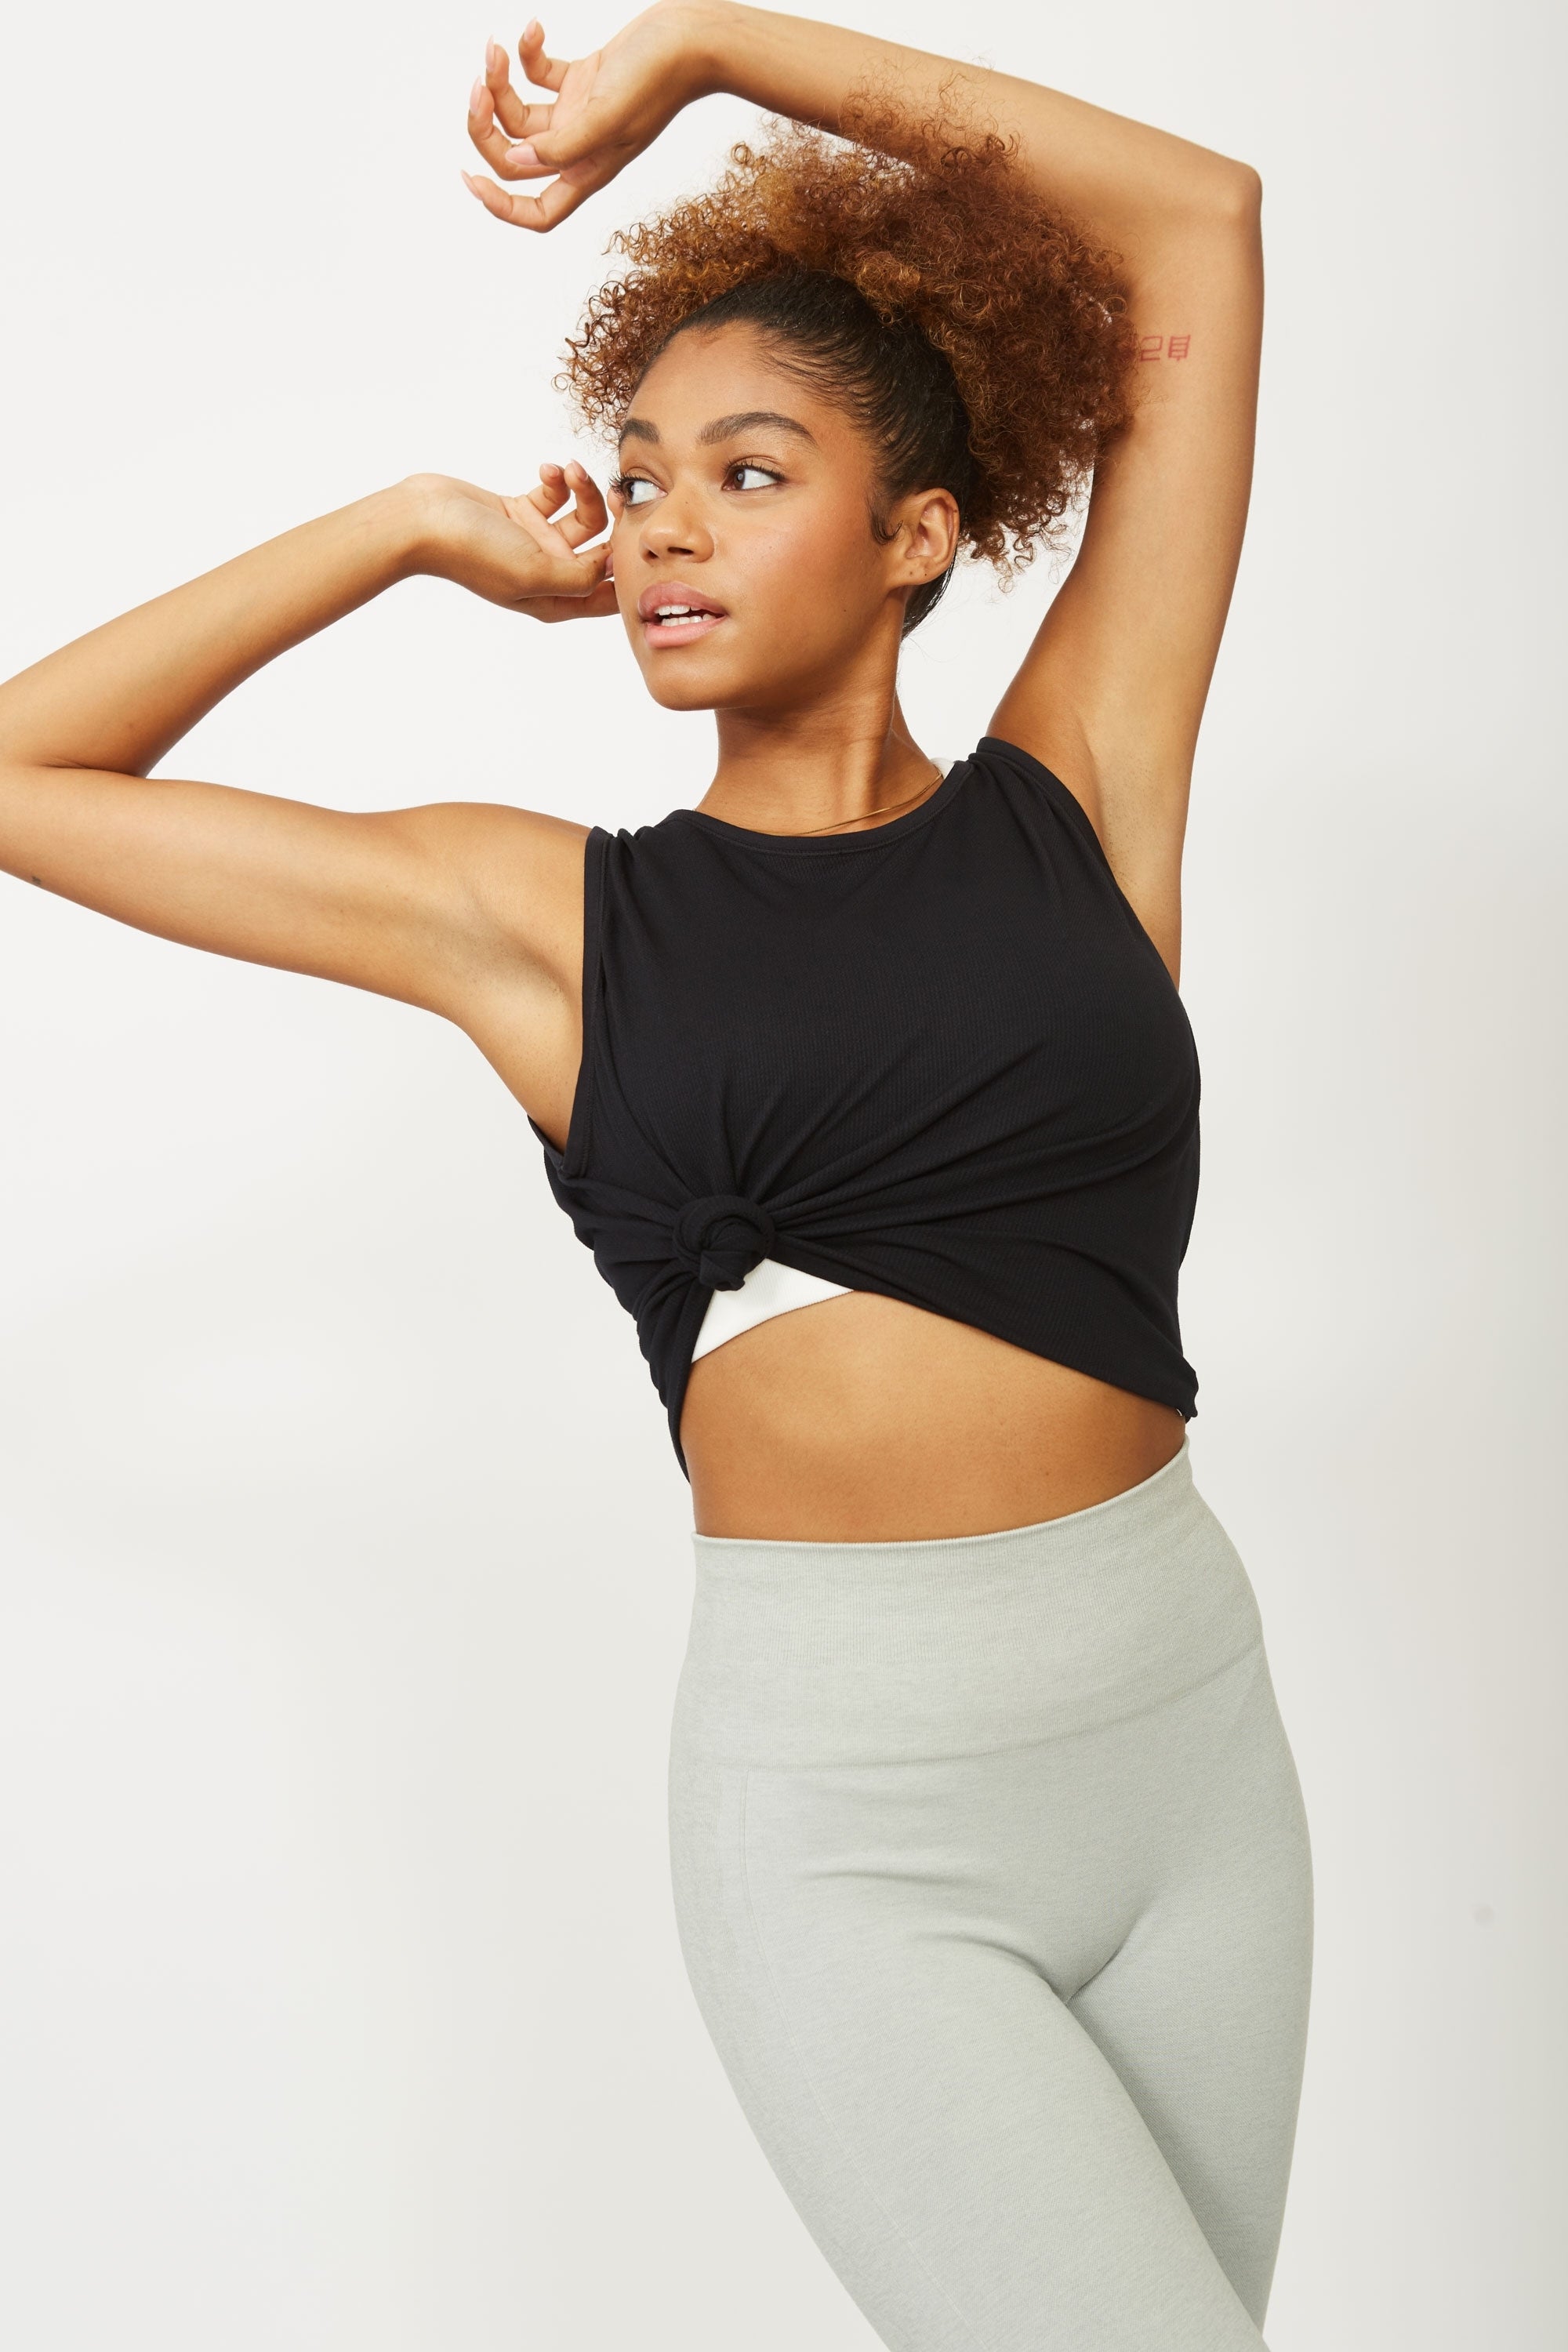 Model wearing grey leggings and black sports yoga top for sustainable activewear brand, Jilla.  